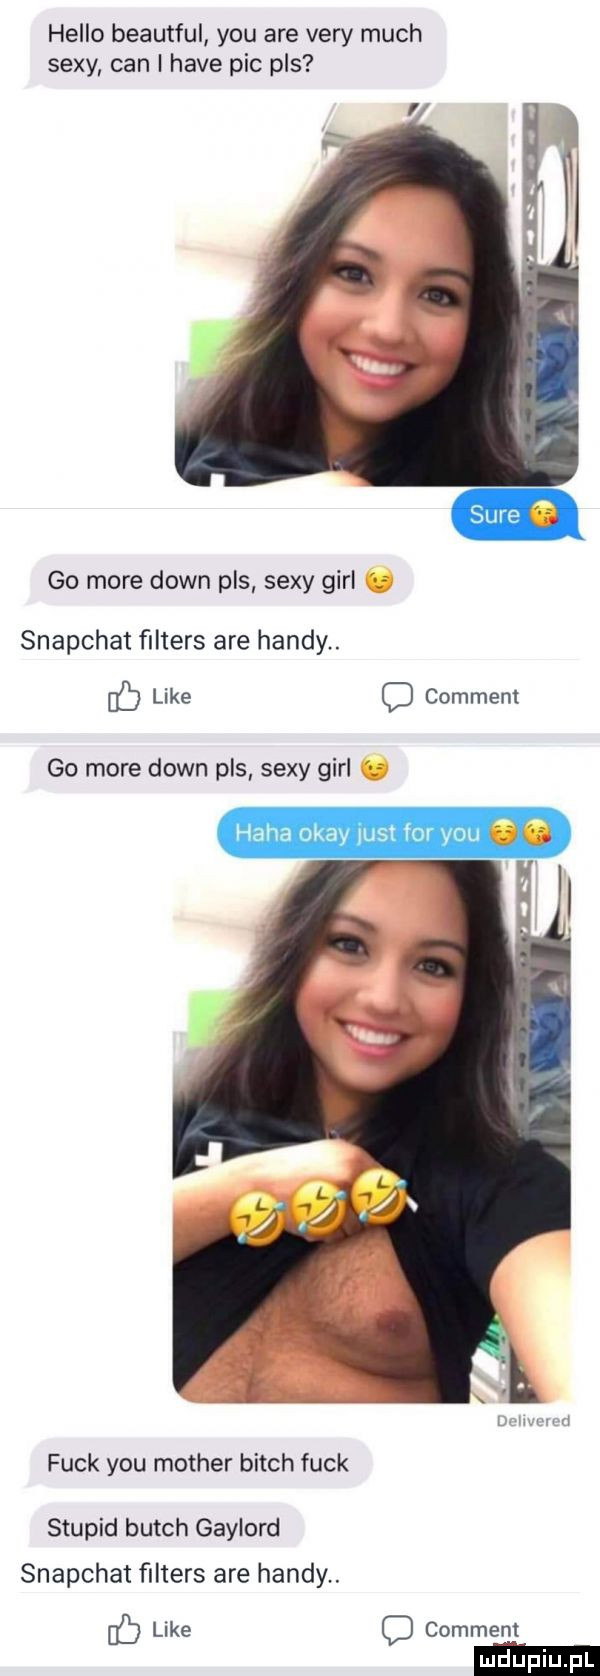 hello beautful y-u are vary much sexy cen i hace pic pas go more down pas sexy gill snapchat filters are hondy. lb like q comment go more down pas sexy gill aha okay lust for y-u o i funk y-u mather bitch funk stupid butoh gaylord snapchat ﬁlters are hondy. like c comment